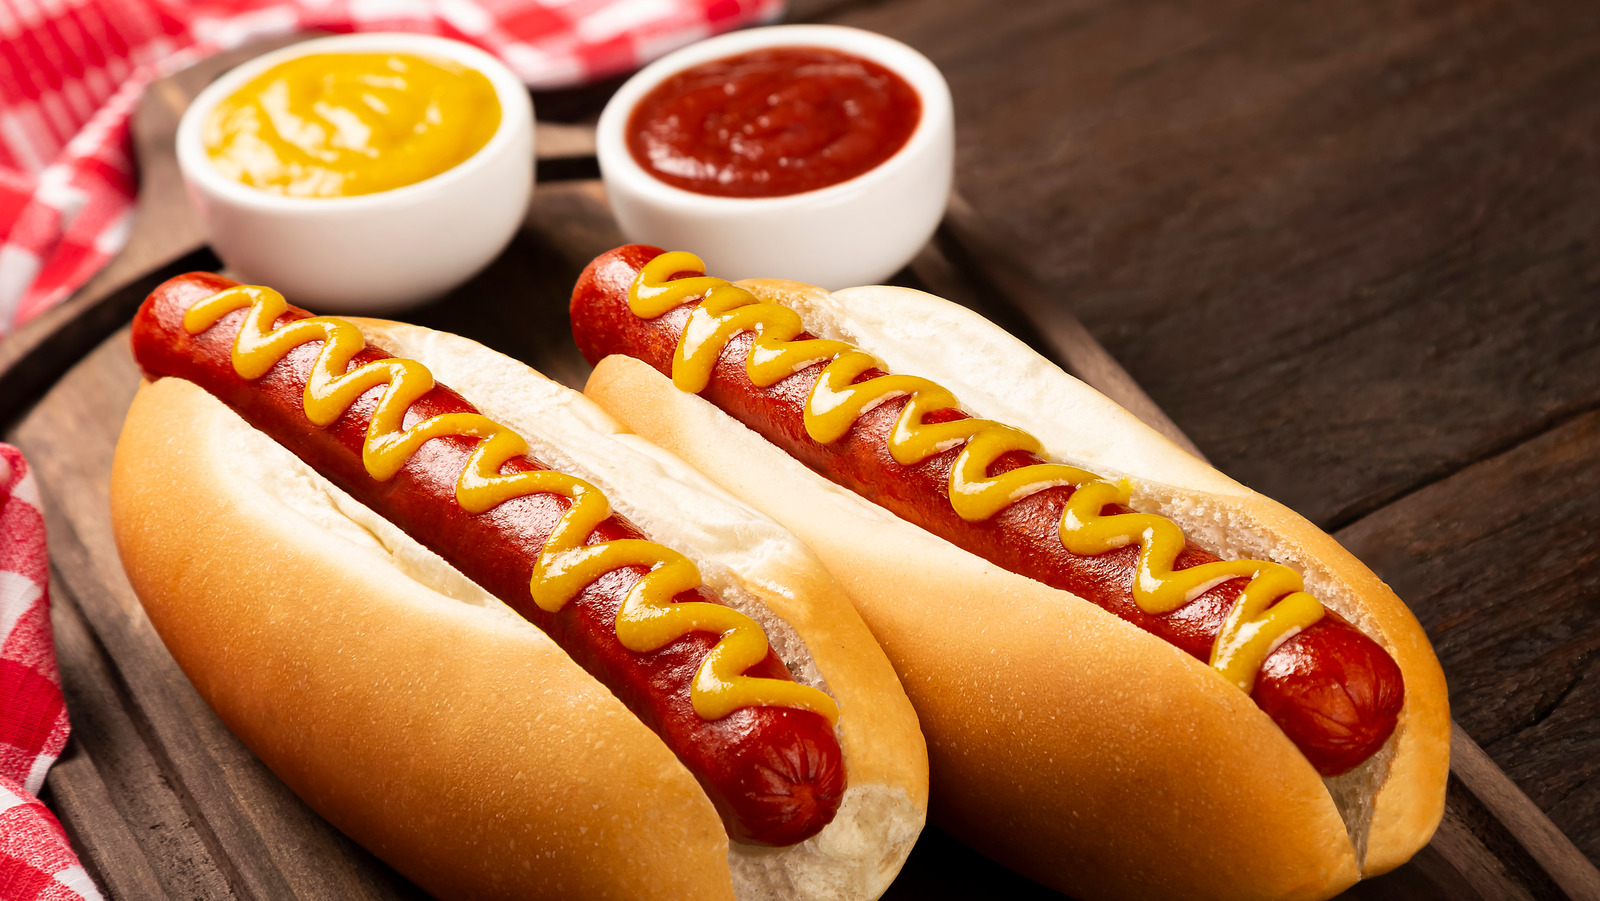 Cured Vs. Uncured Hot Dogs: What'S The Difference?